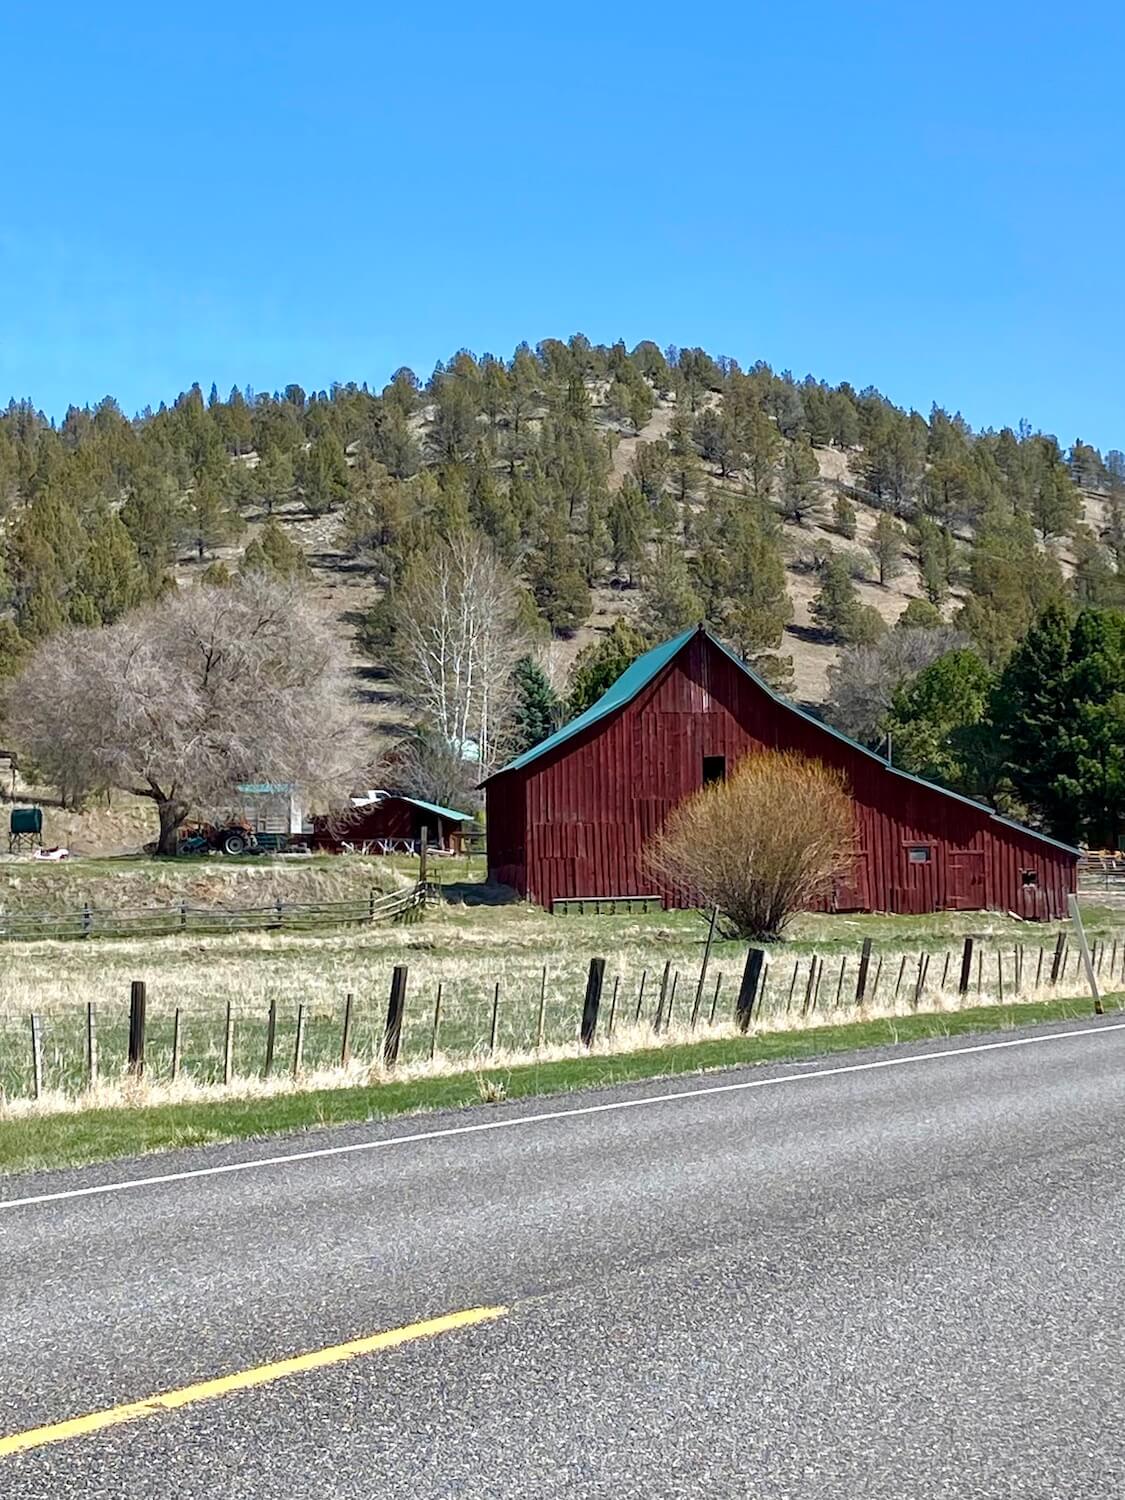 A red barn covered by a green roof sits near the highway, which can be seen along with a yellow center line.  The barn is surrounded by several dormant trees and the hills rise above to the blue sky, covered by a sparse forest of pine trees.  